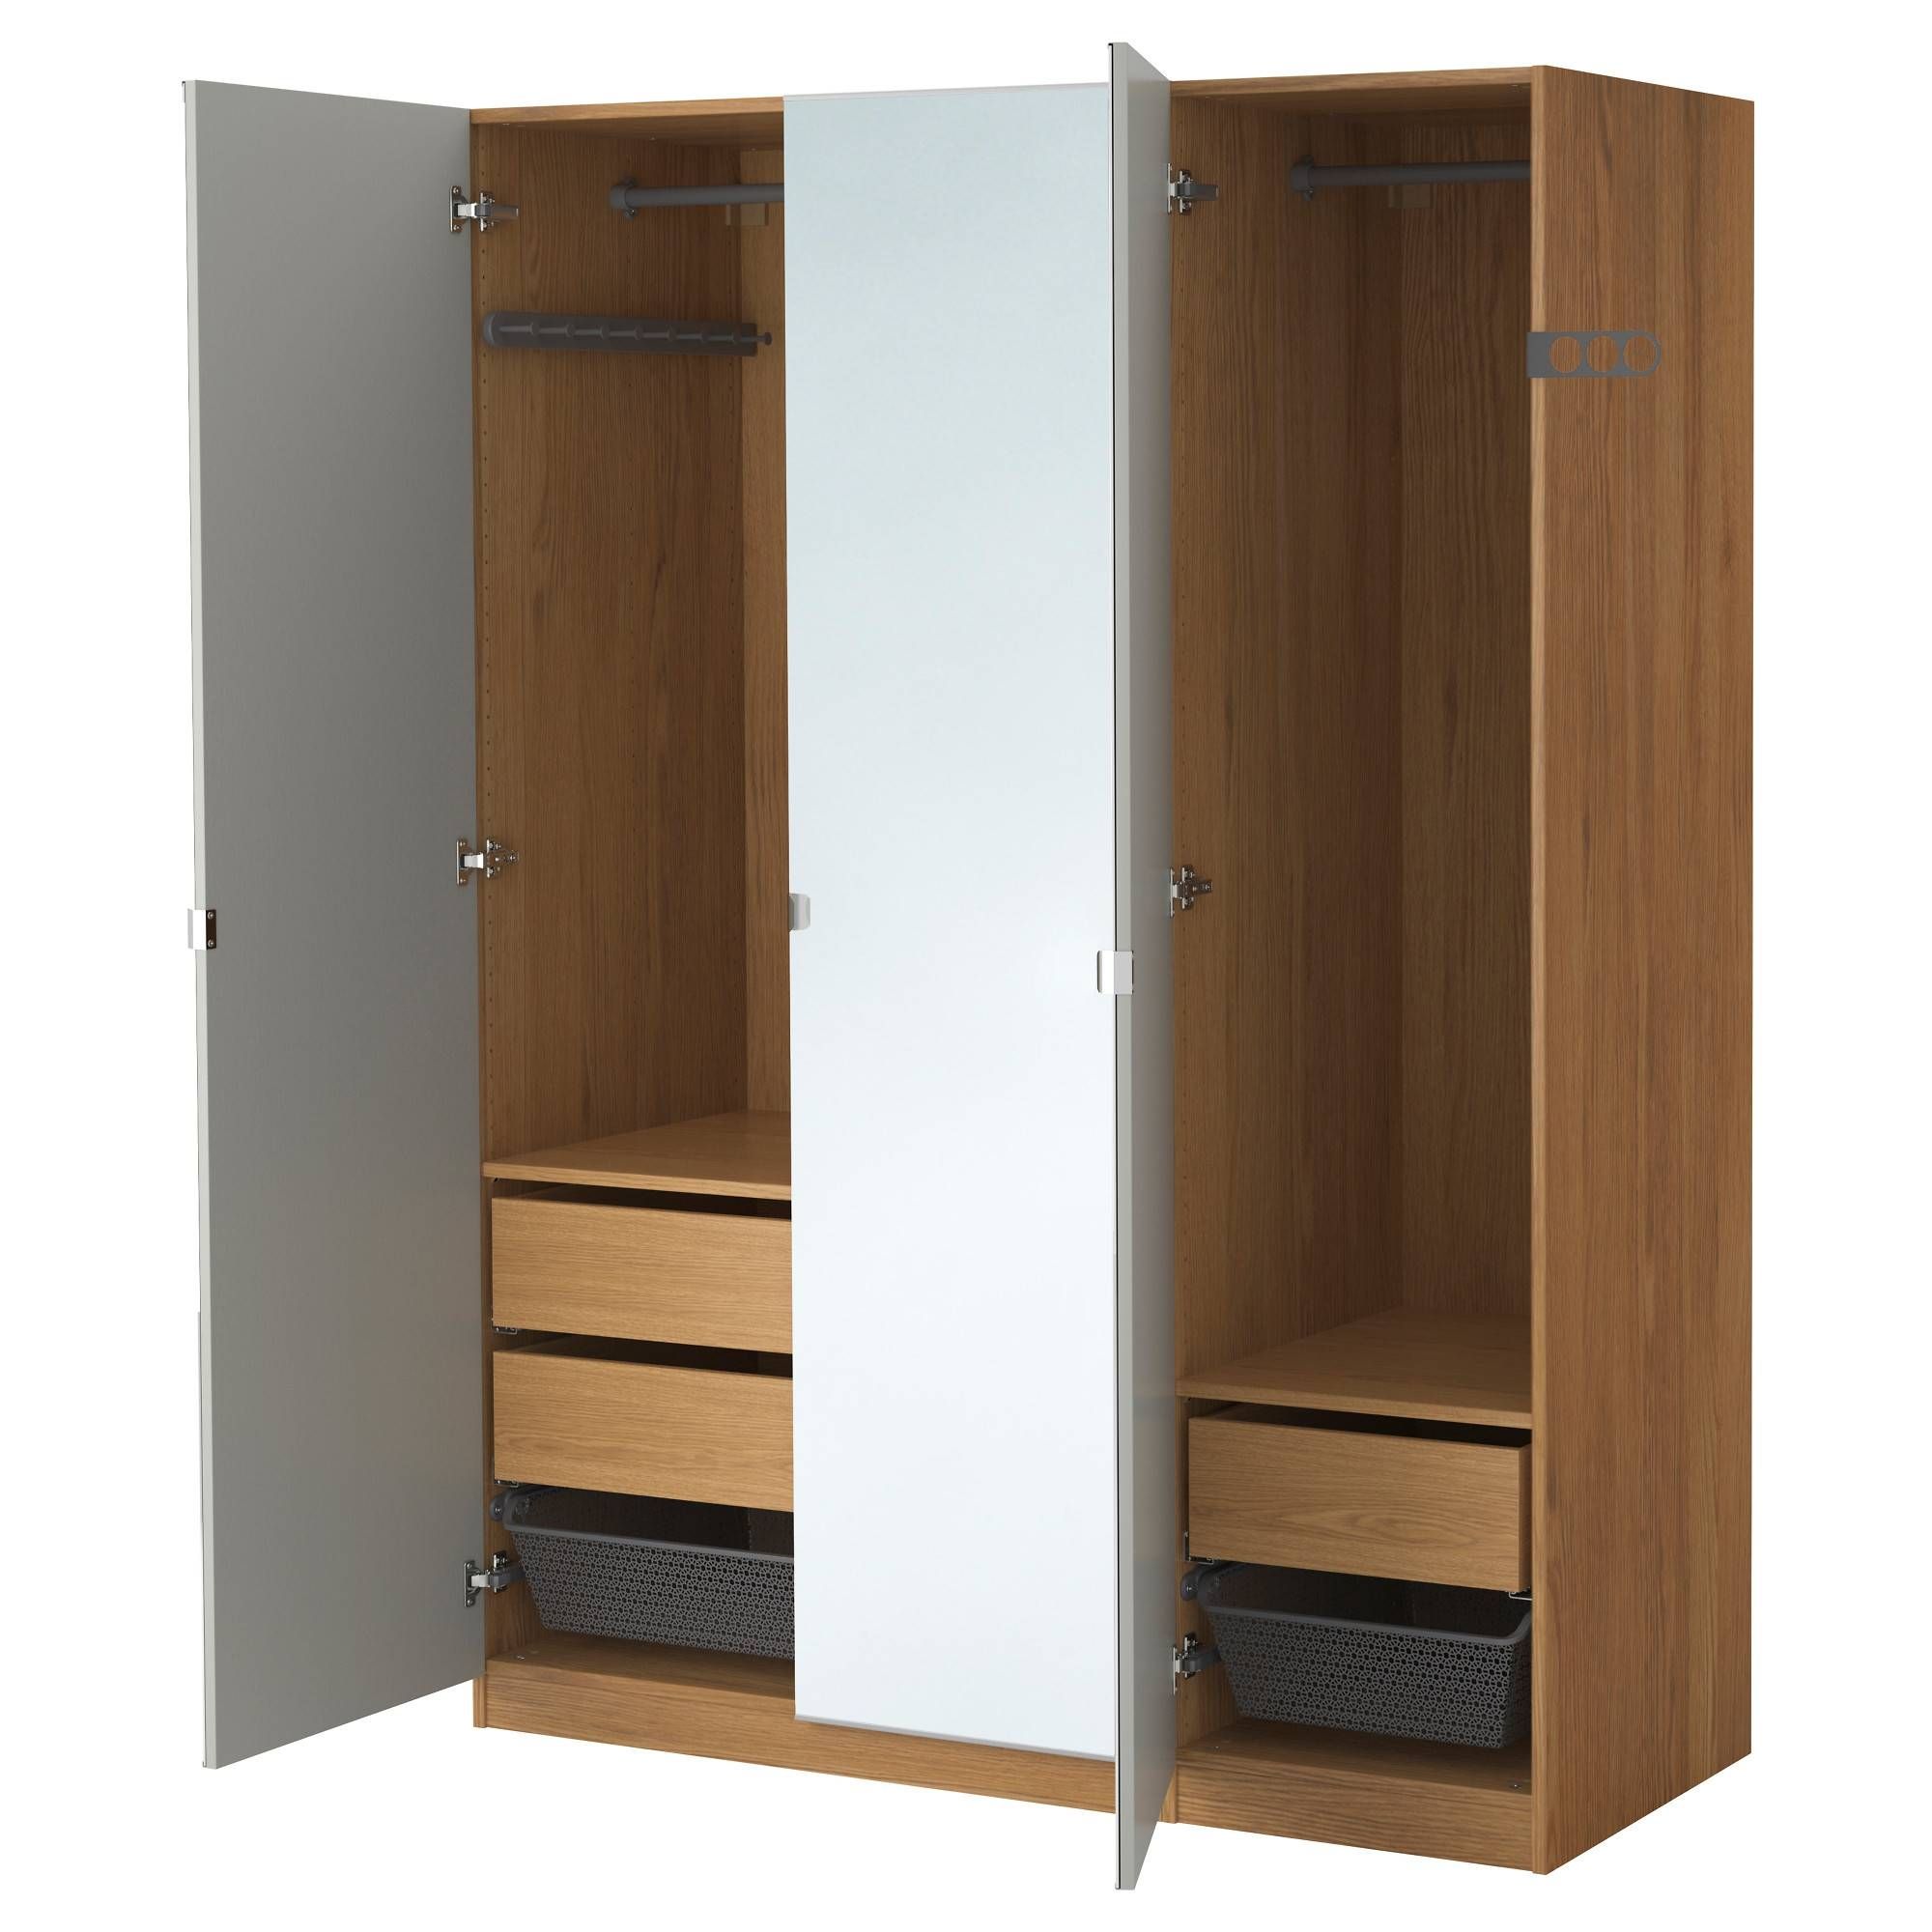 Wardrobes | Ikea Inside Wardrobes With Shelves And Drawers (View 21 of 30)